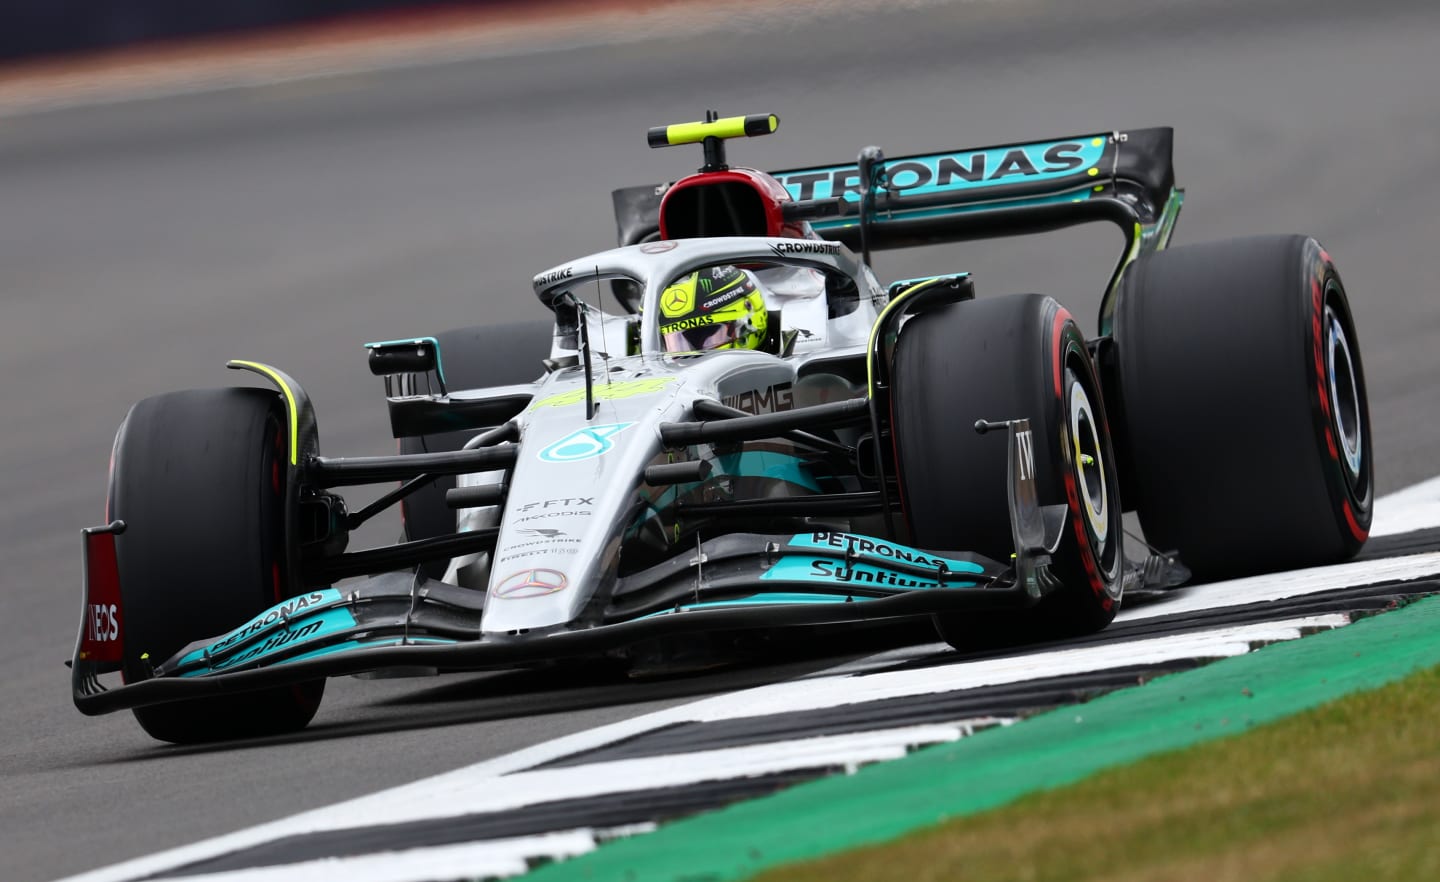 NORTHAMPTON, ENGLAND - JULY 02: Lewis Hamilton of Great Britain driving the (44) Mercedes AMG Petronas F1 Team W13 on track during final practice ahead of the F1 Grand Prix of Great Britain at Silverstone on July 02, 2022 in Northampton, England. (Photo by Clive Rose/Getty Images)